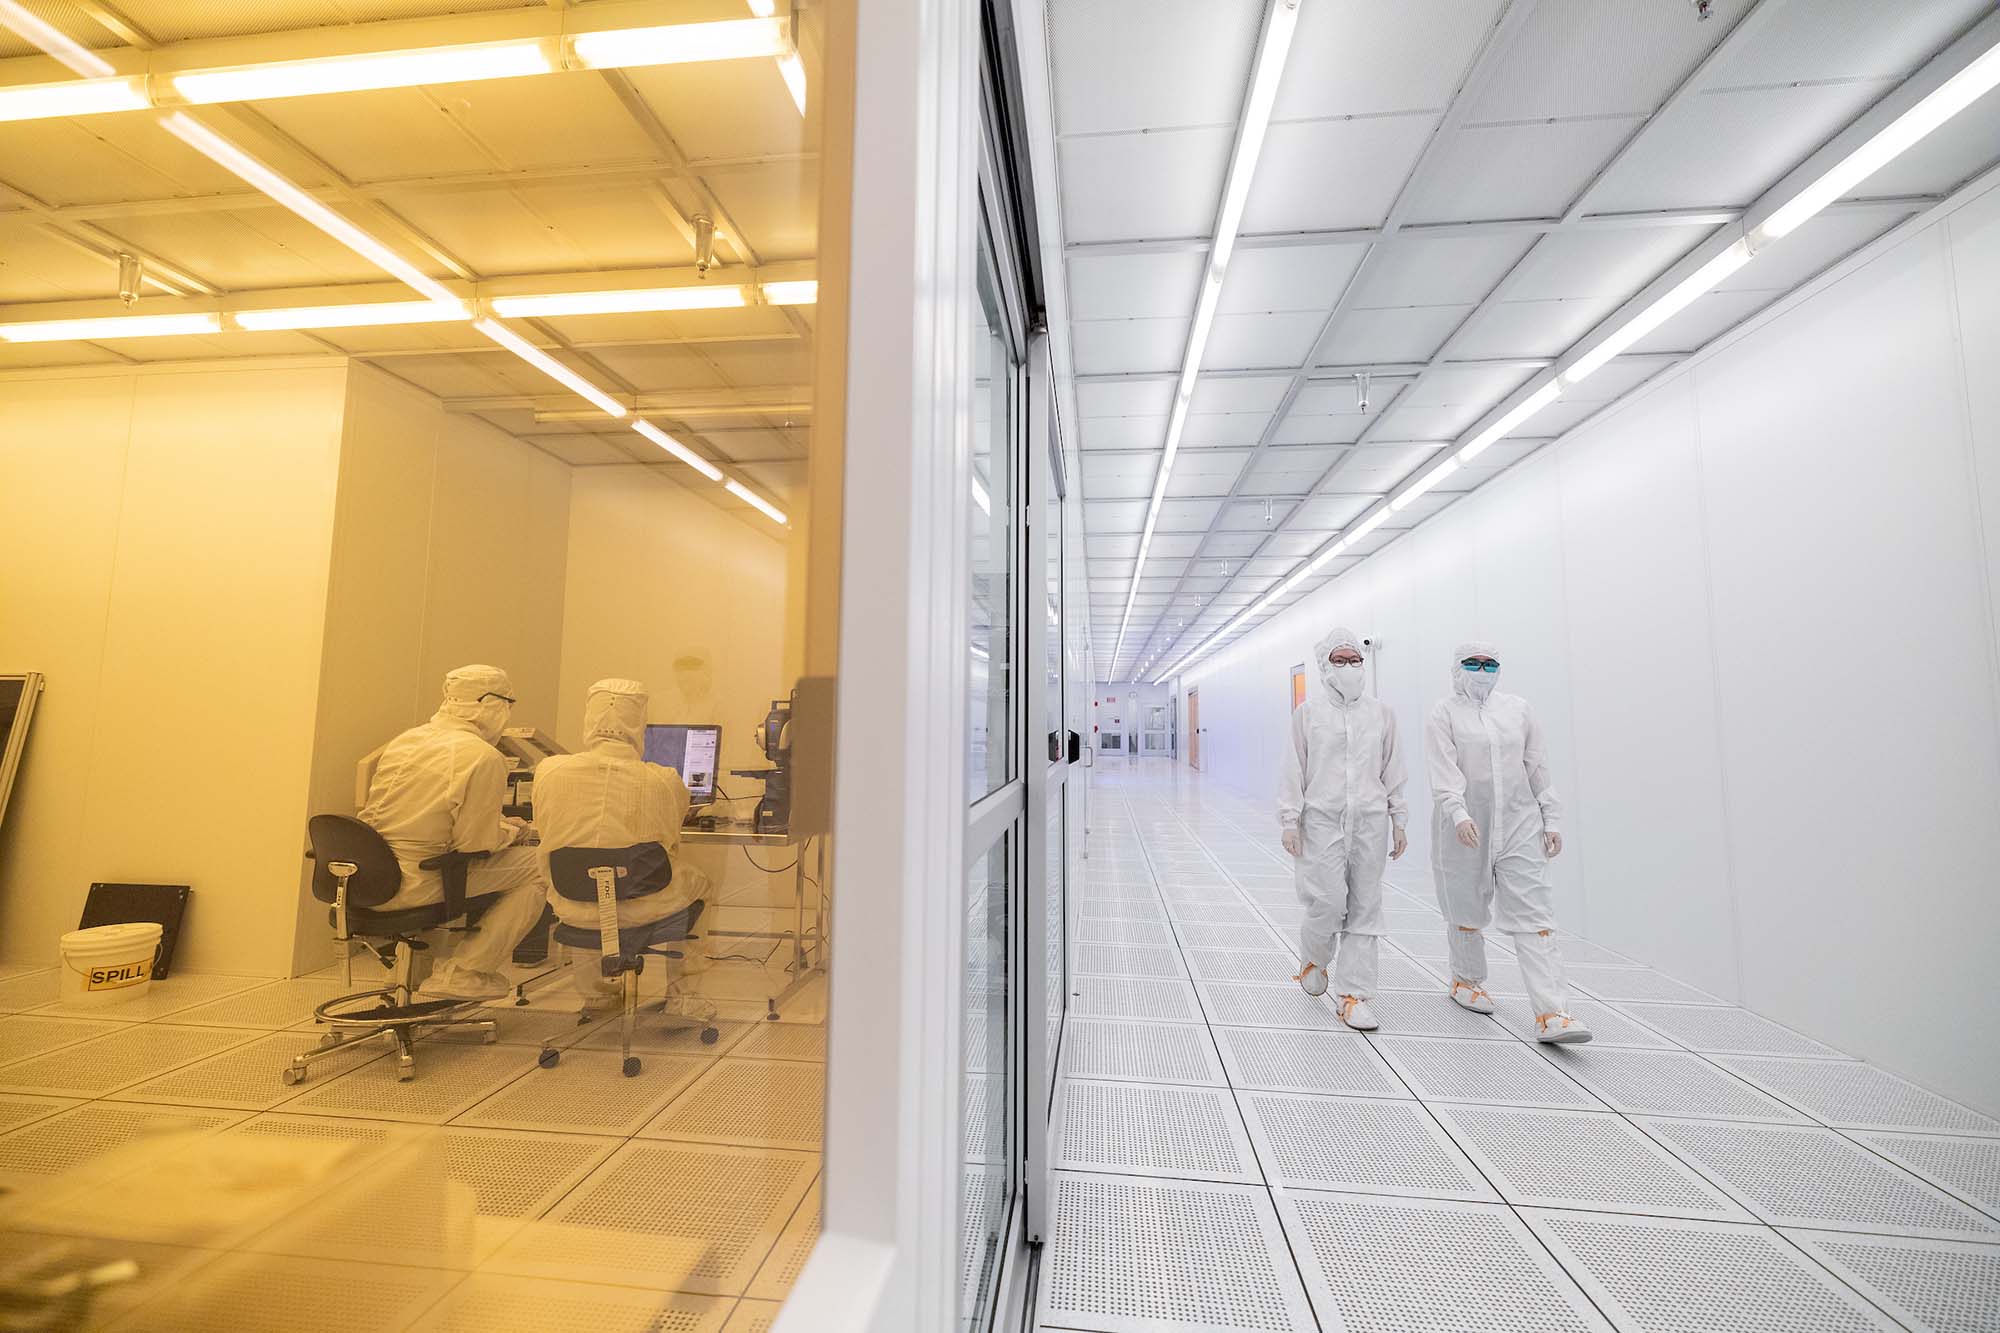 A view of a hallway (right) inside ASU's Macrotechnology Works research facility. On the left is a view into a room where the lighting is yellow. On both the right and the left, people are wearing clean room protective clothing.